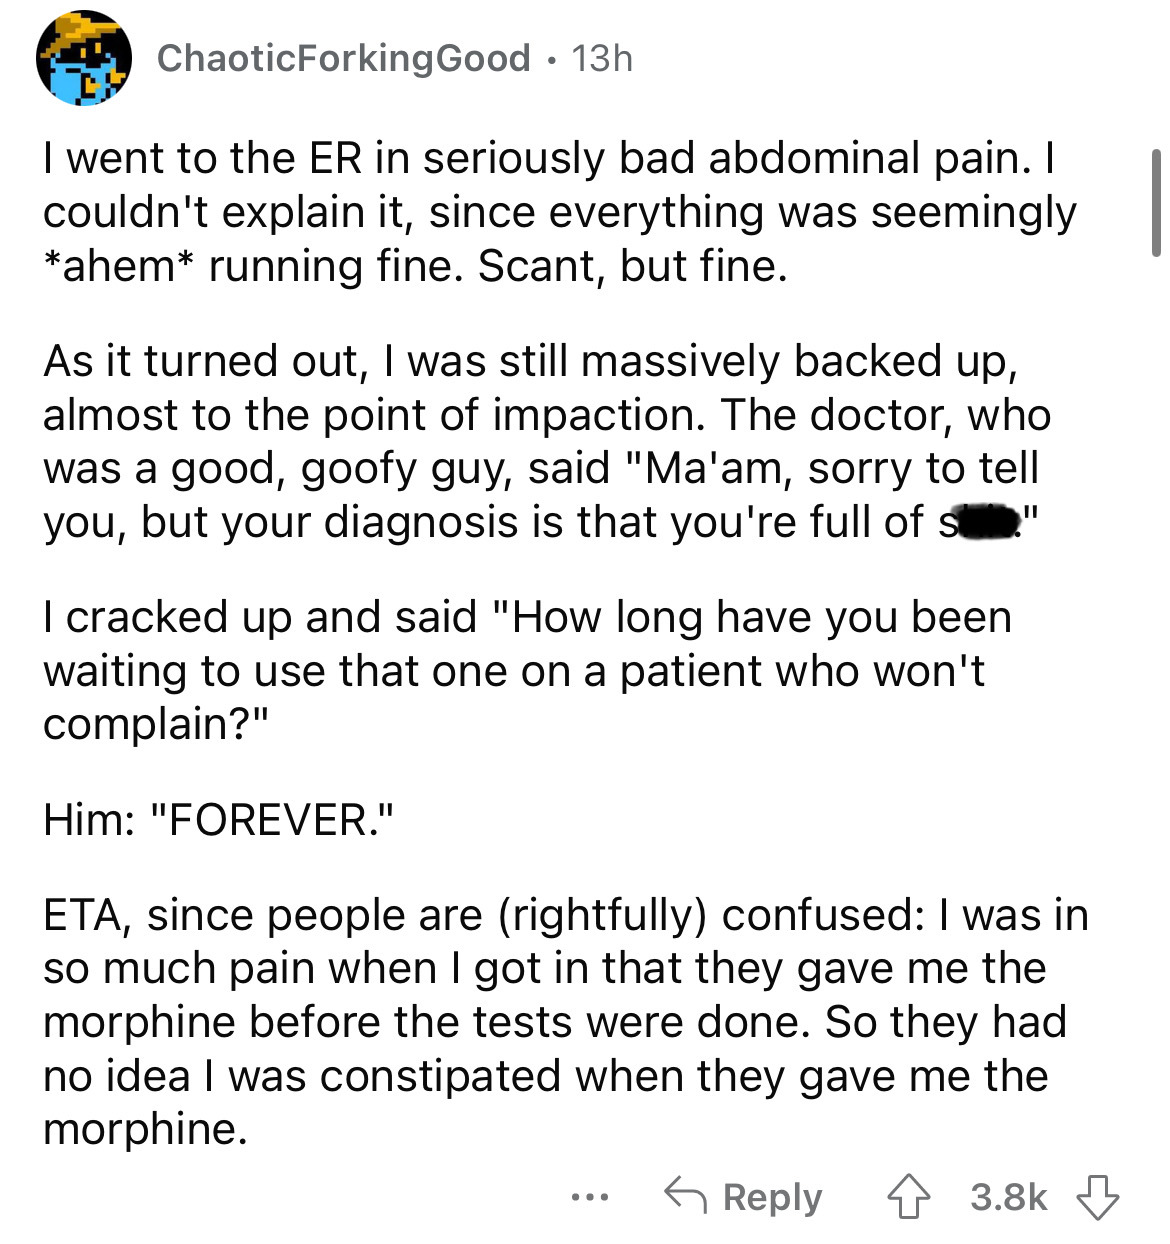 angle - ChaoticForkingGood. 13h I went to the Er in seriously bad abdominal pain. I couldn't explain it, since everything was seemingly ahem running fine. Scant, but fine. As it turned out, I was still massively backed up, almost to the point of impaction